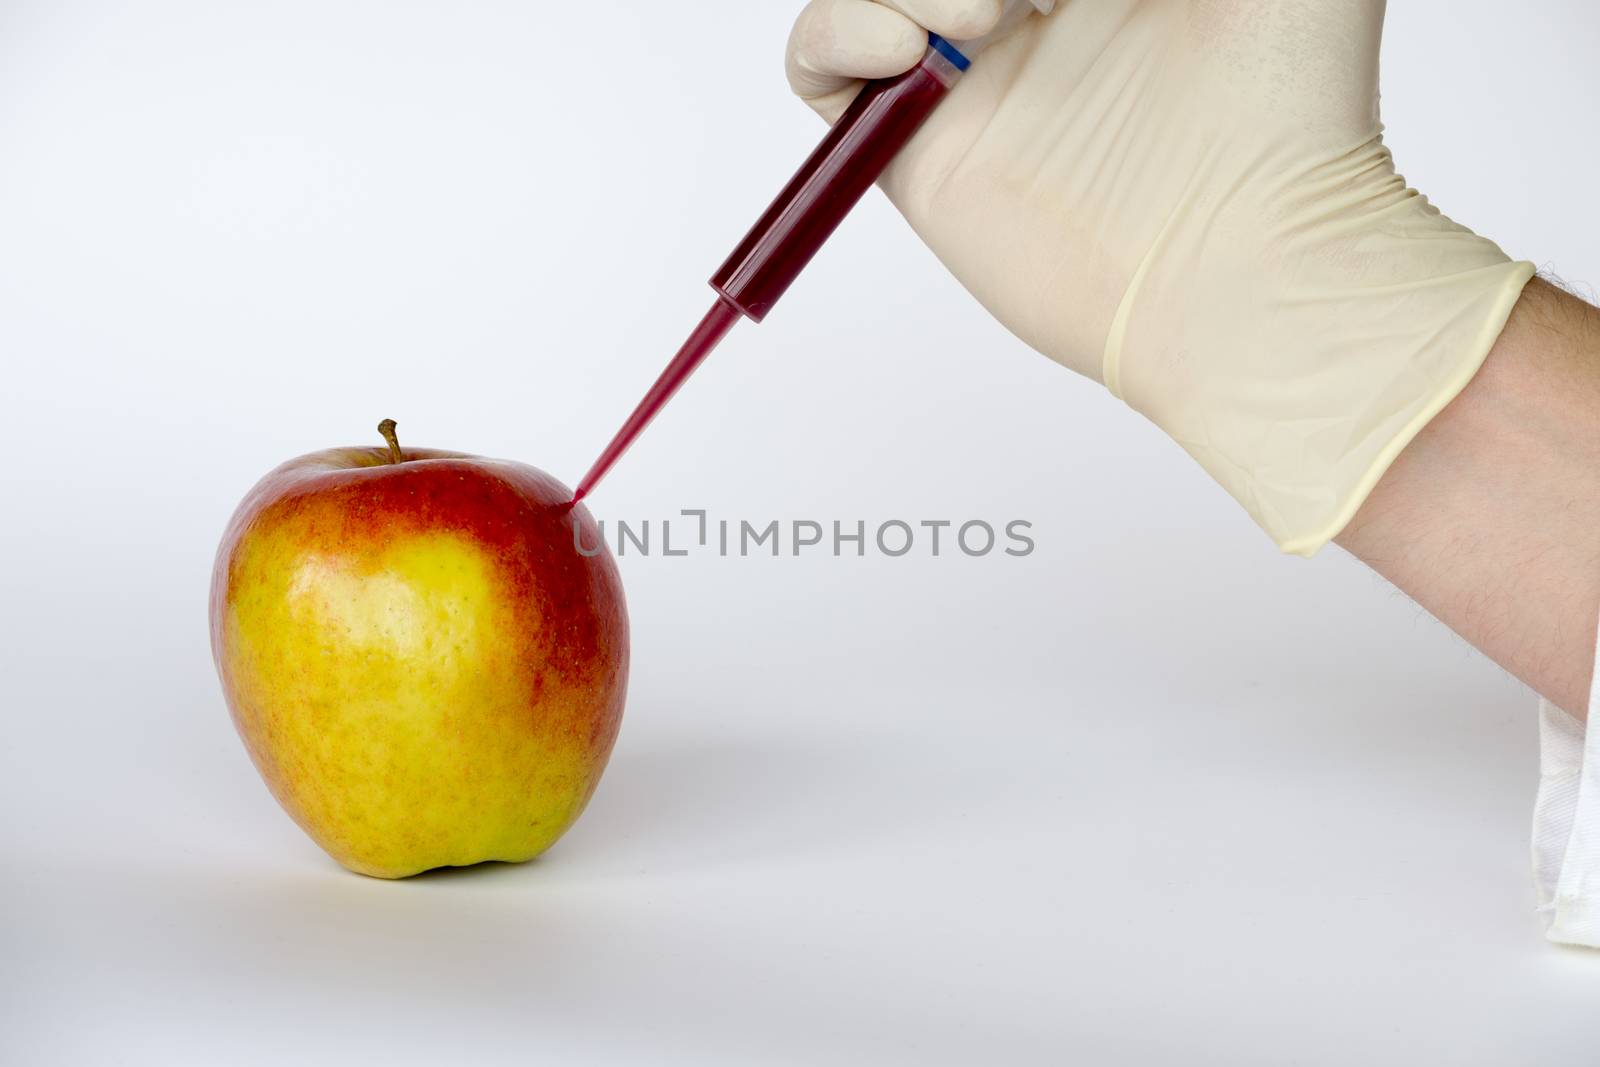 GMO are living organisms whose genetic material has been altered to enhance some qualities over others